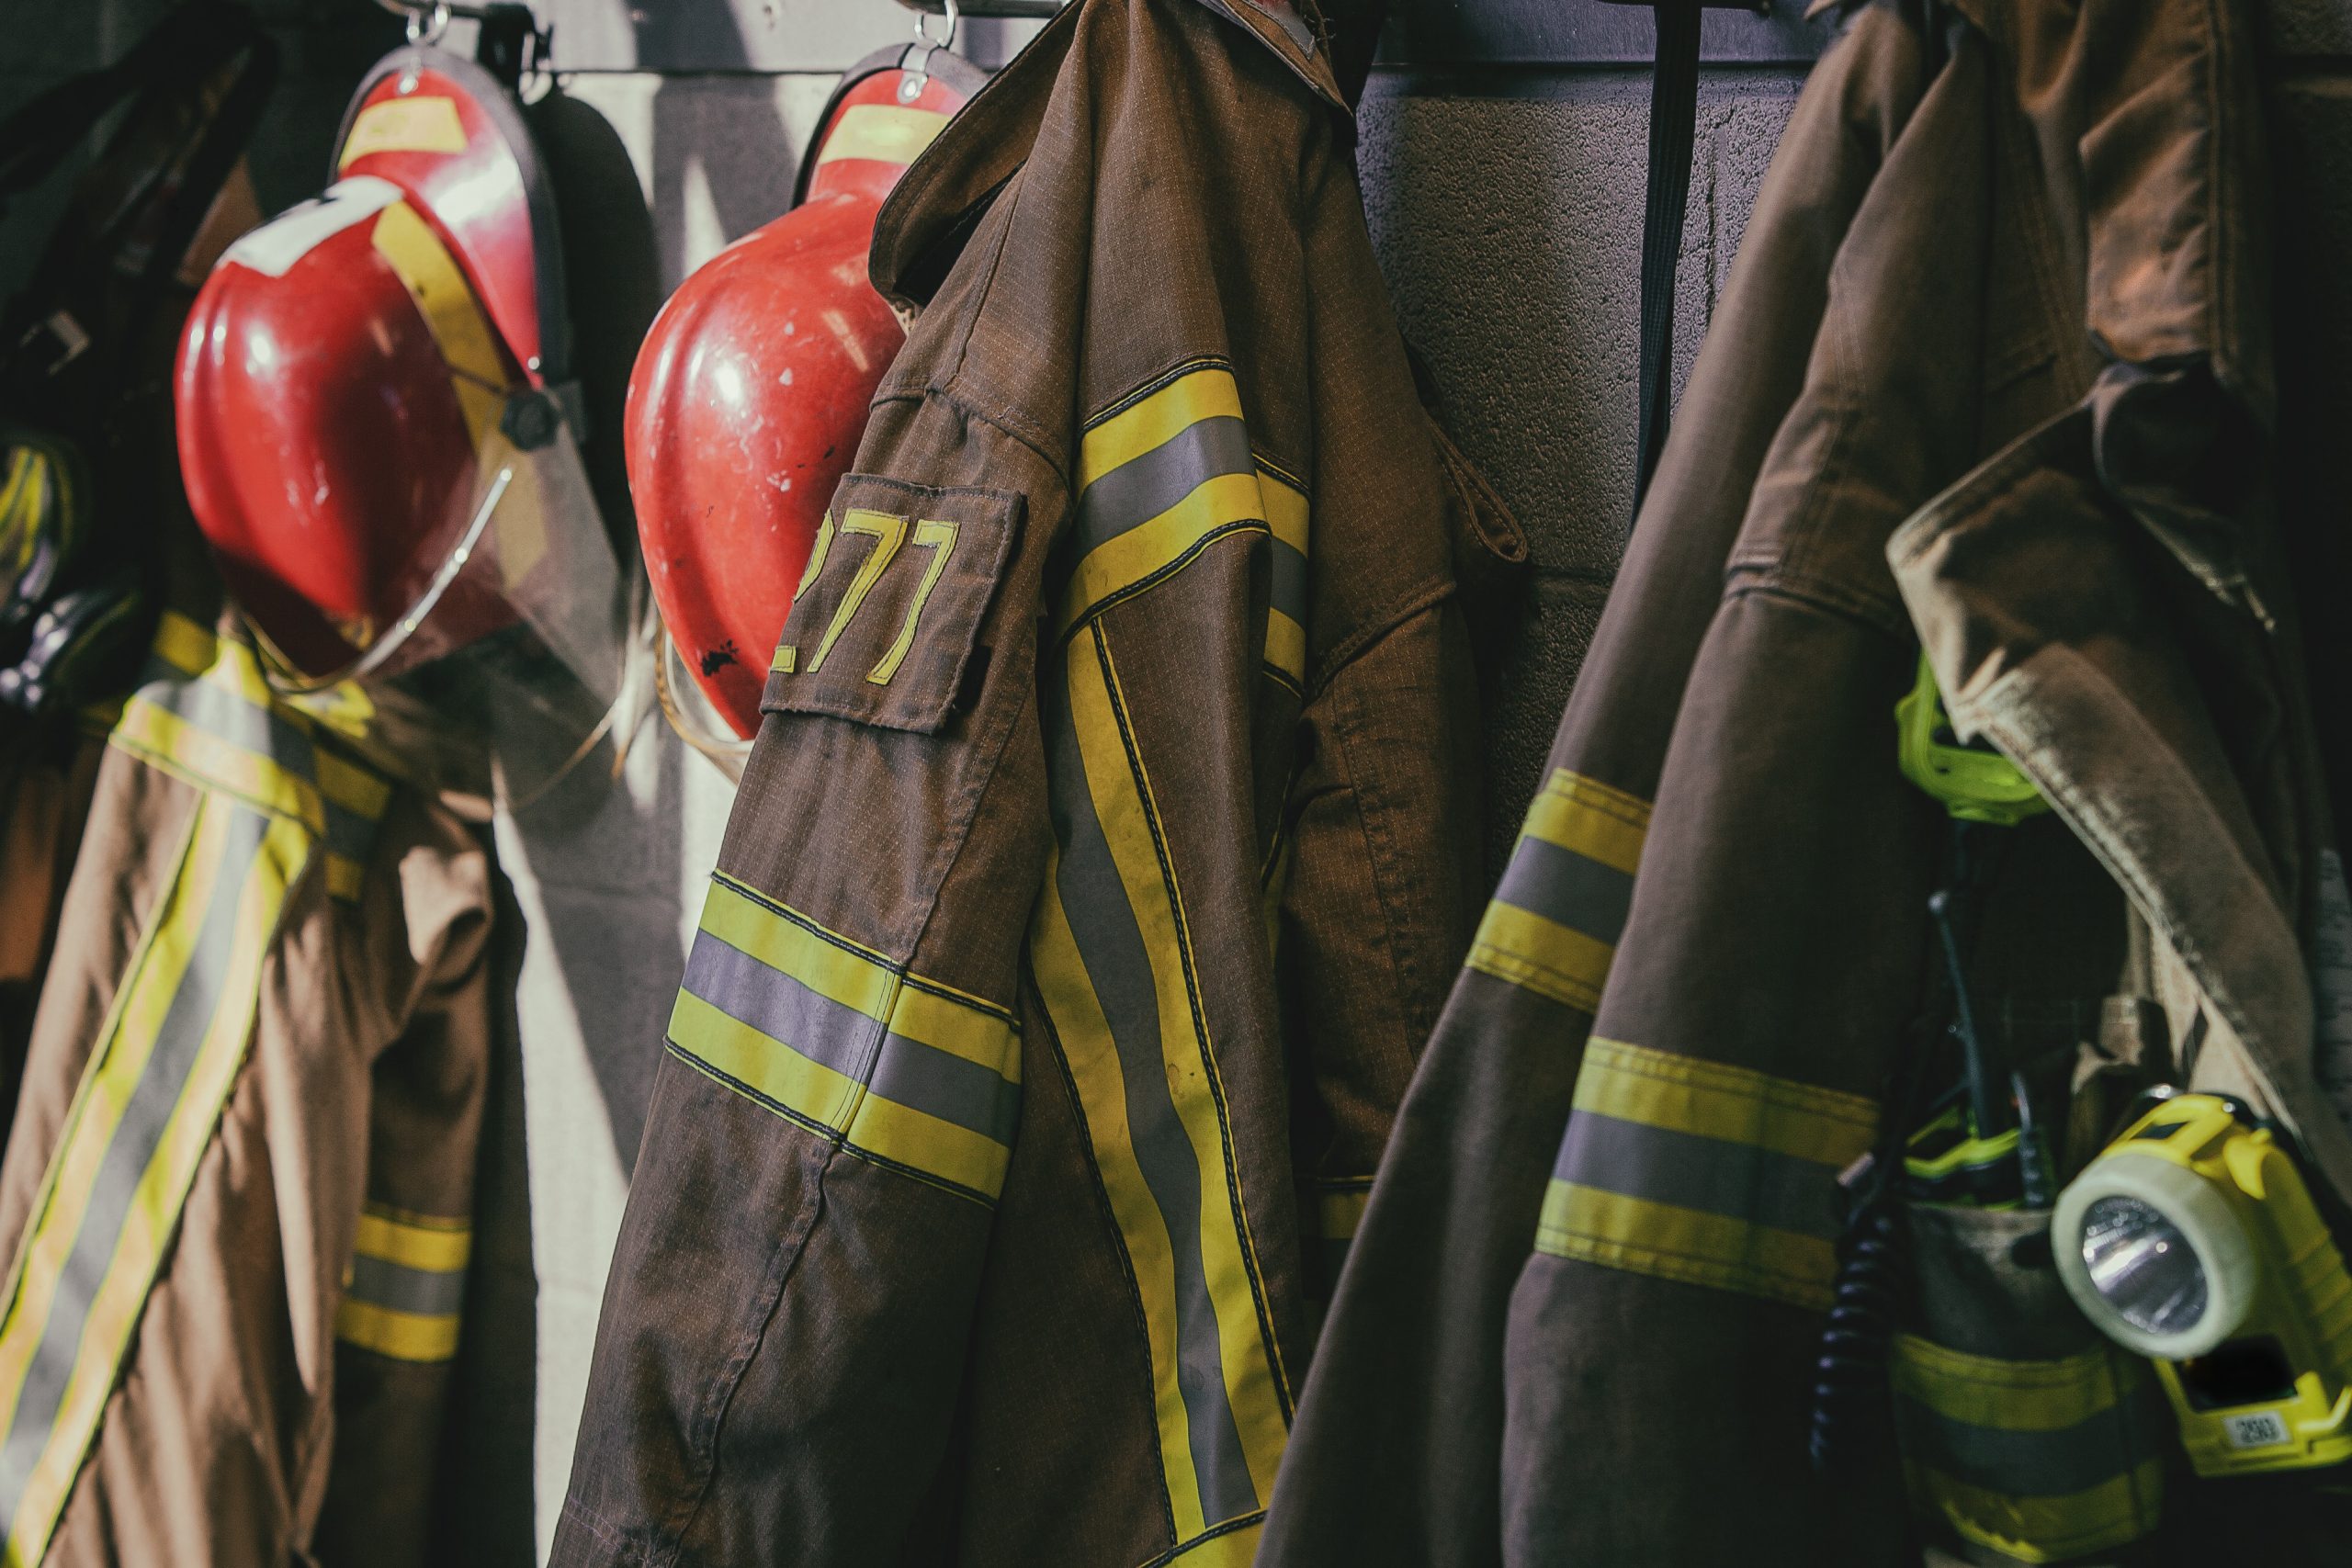 Edition 58 – Establishment of Human Trafficking Reporting Protocols, Mandatory Specialized Training, and the Development of a Human Trafficking Liaison Officer (HTLO) for Alameda County Fire Department (ACFD)